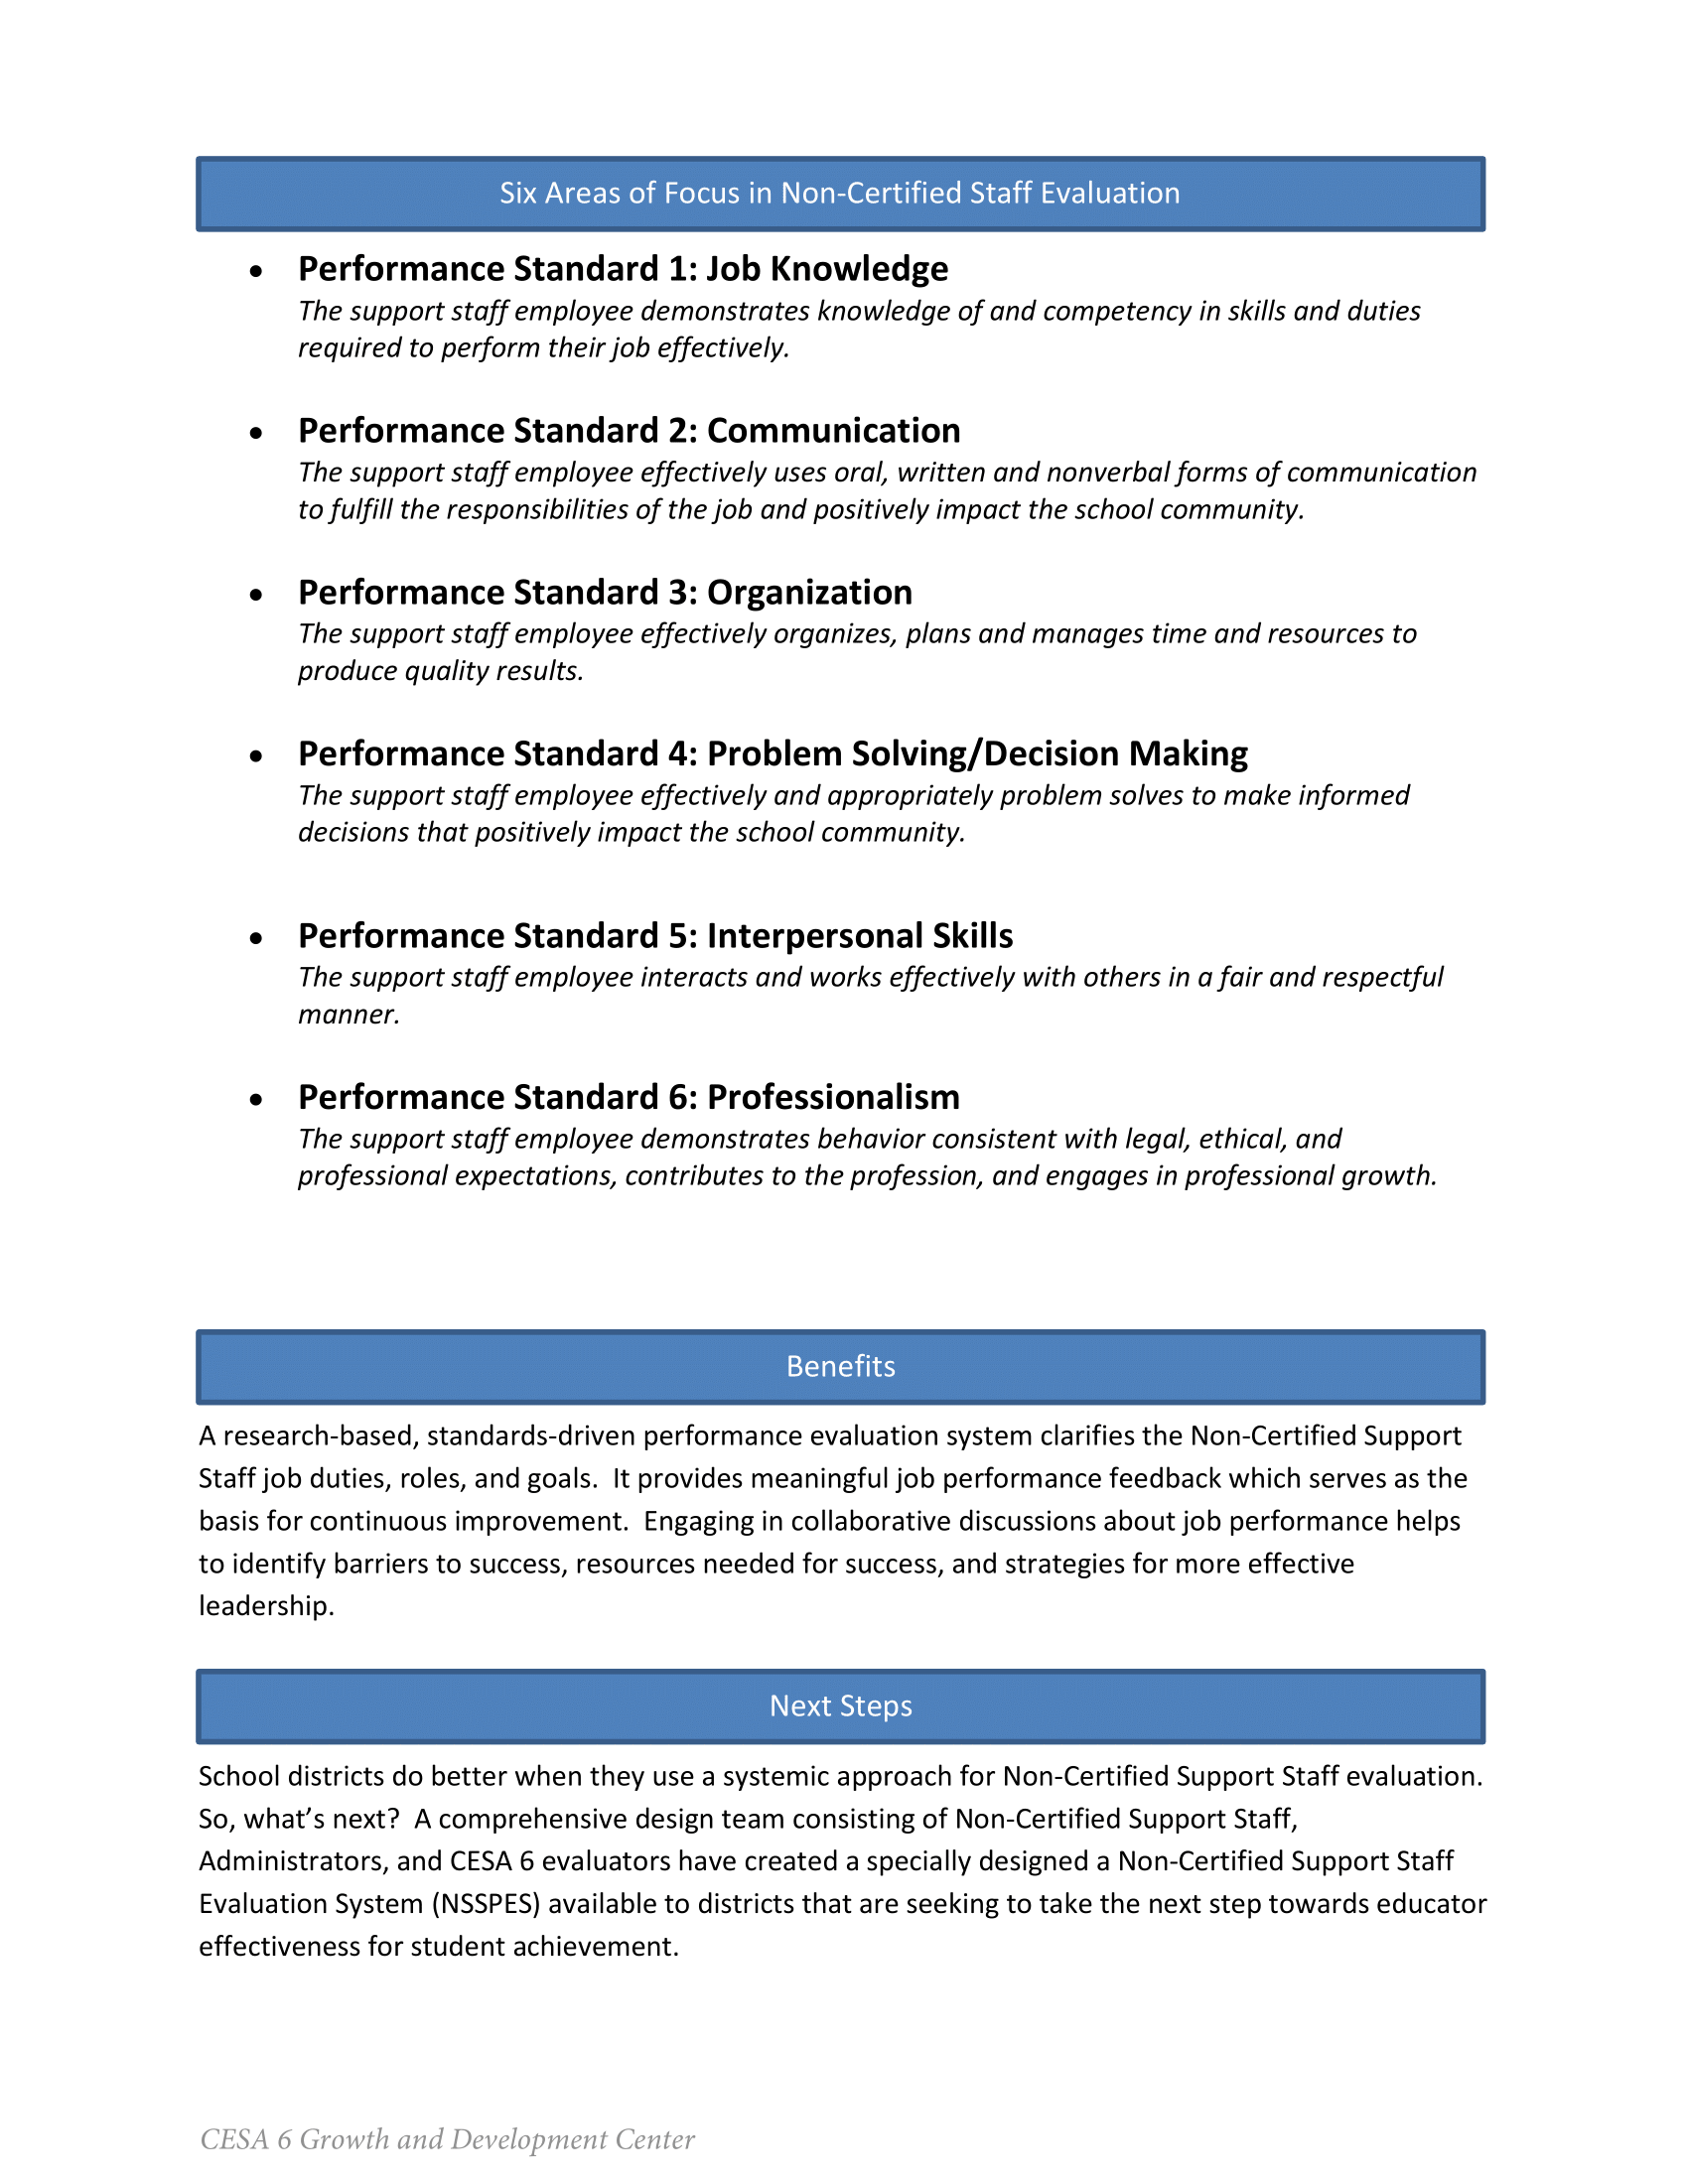 Non-Certified_Whitepaper2_1-4-18-2.png